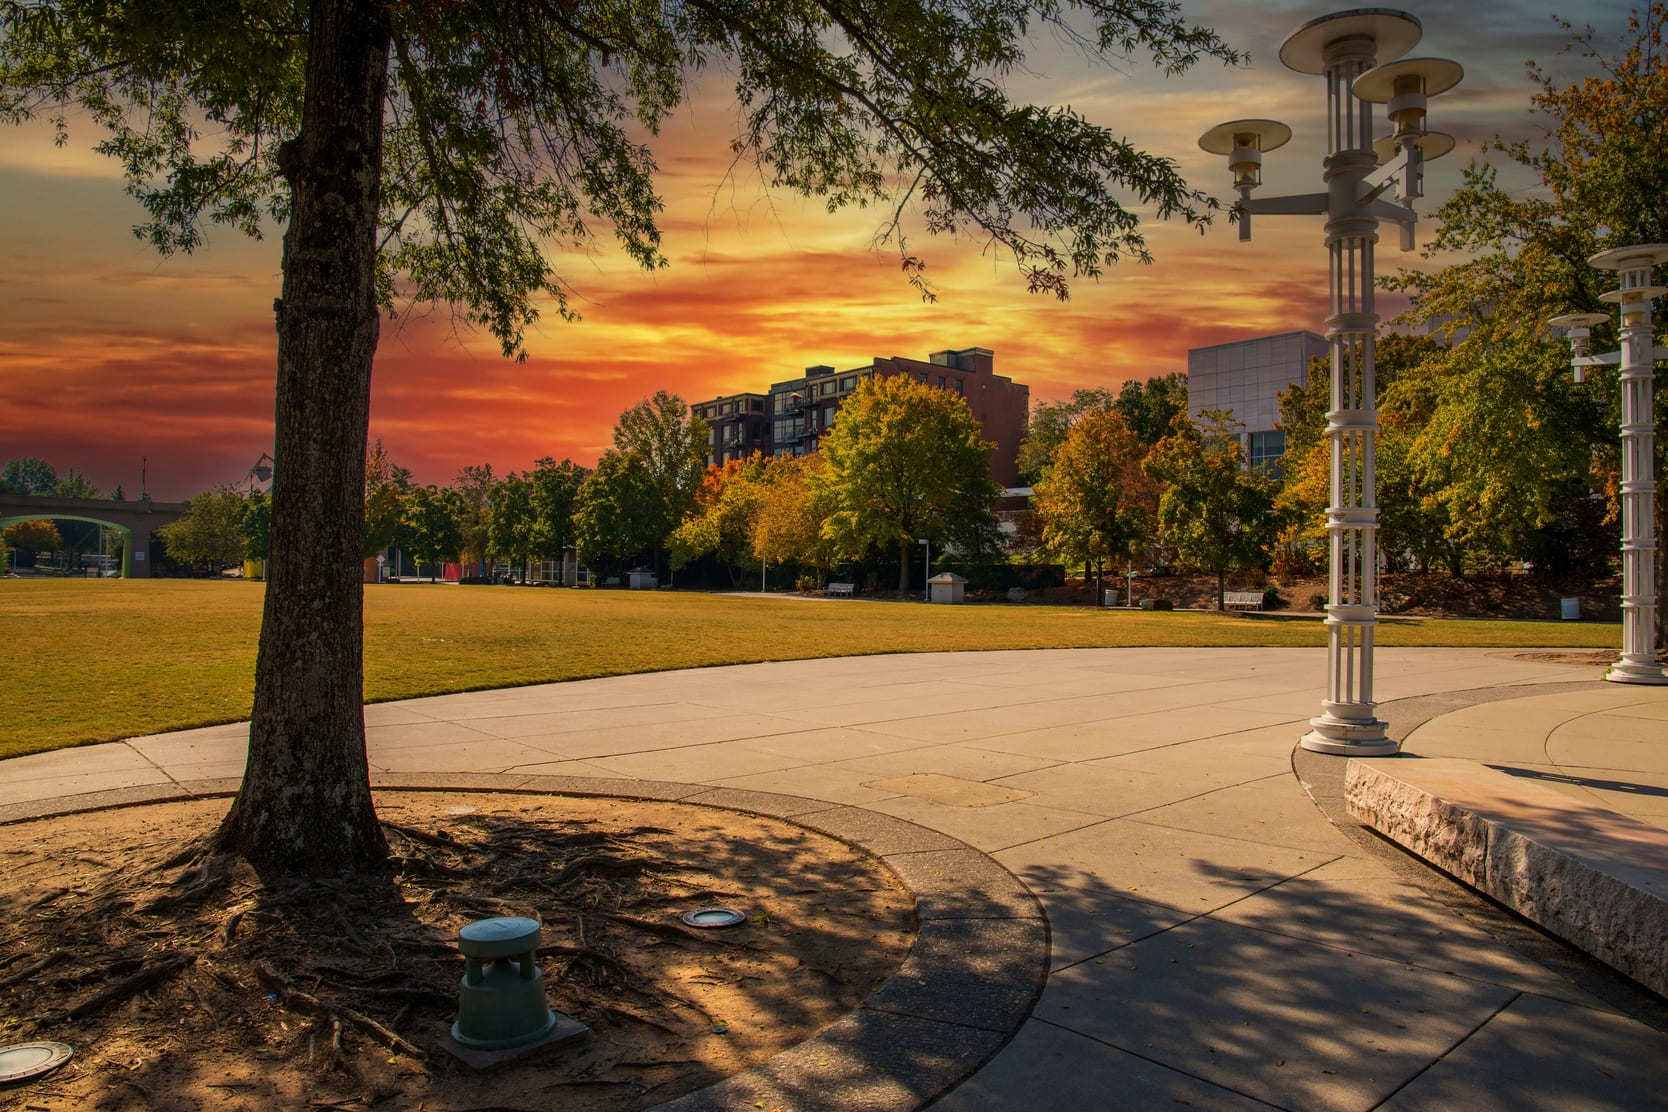 Sunset at a park in Knoxville, Tennessee